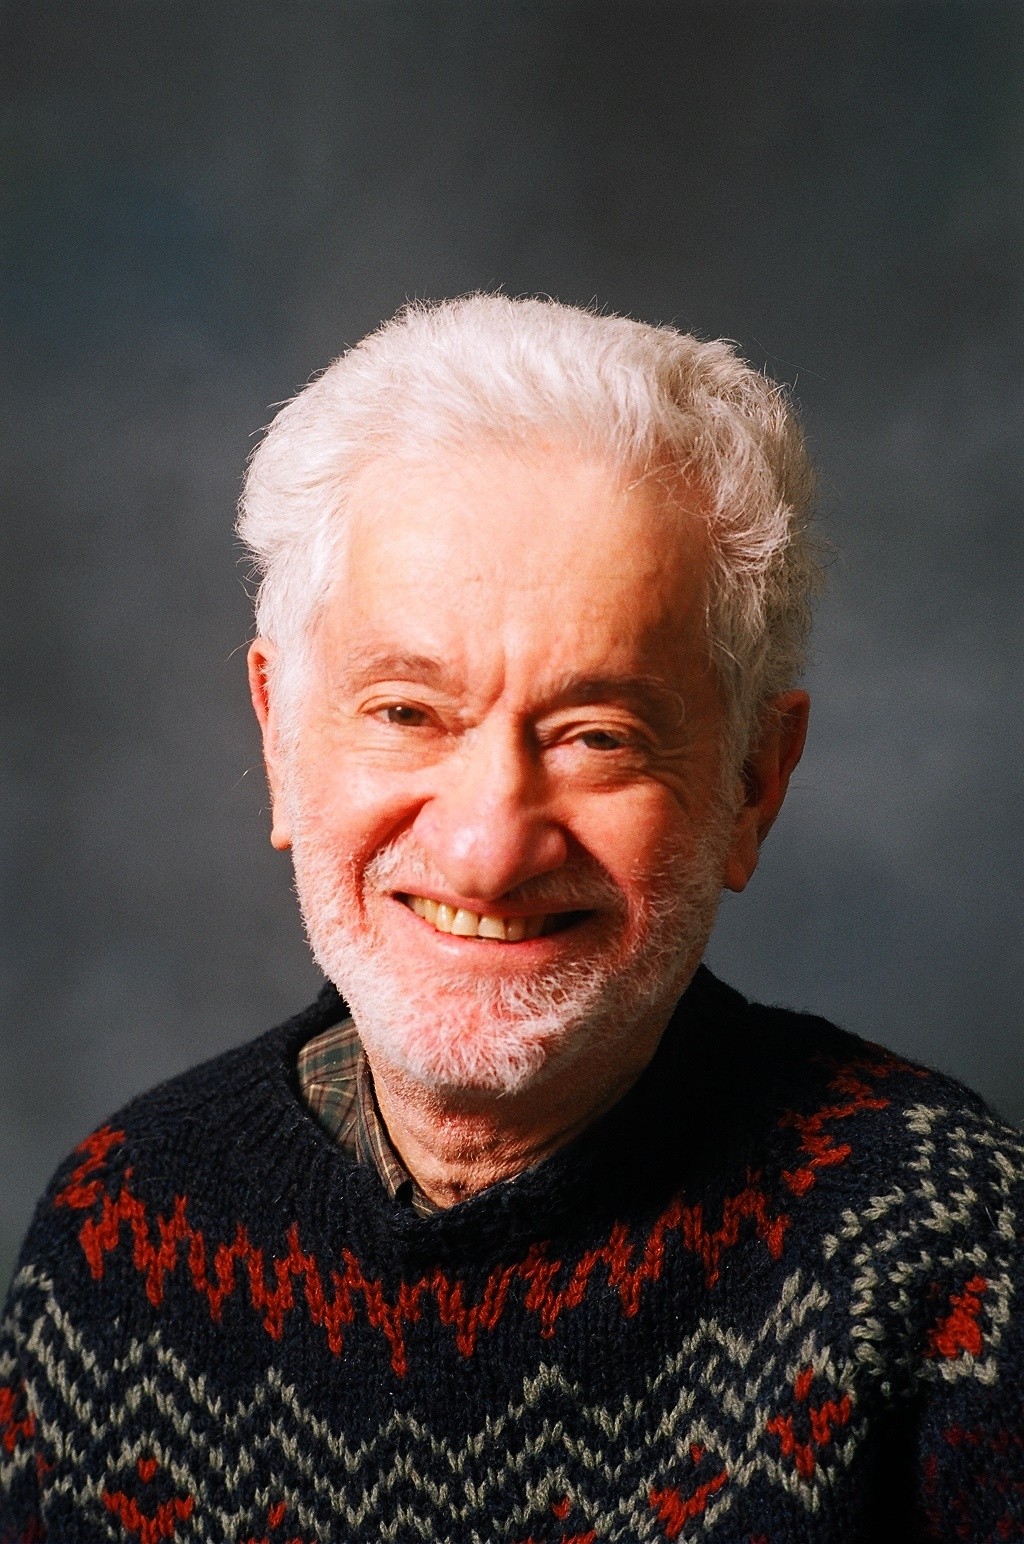 Stephen H. Unger poses in a festive sweater